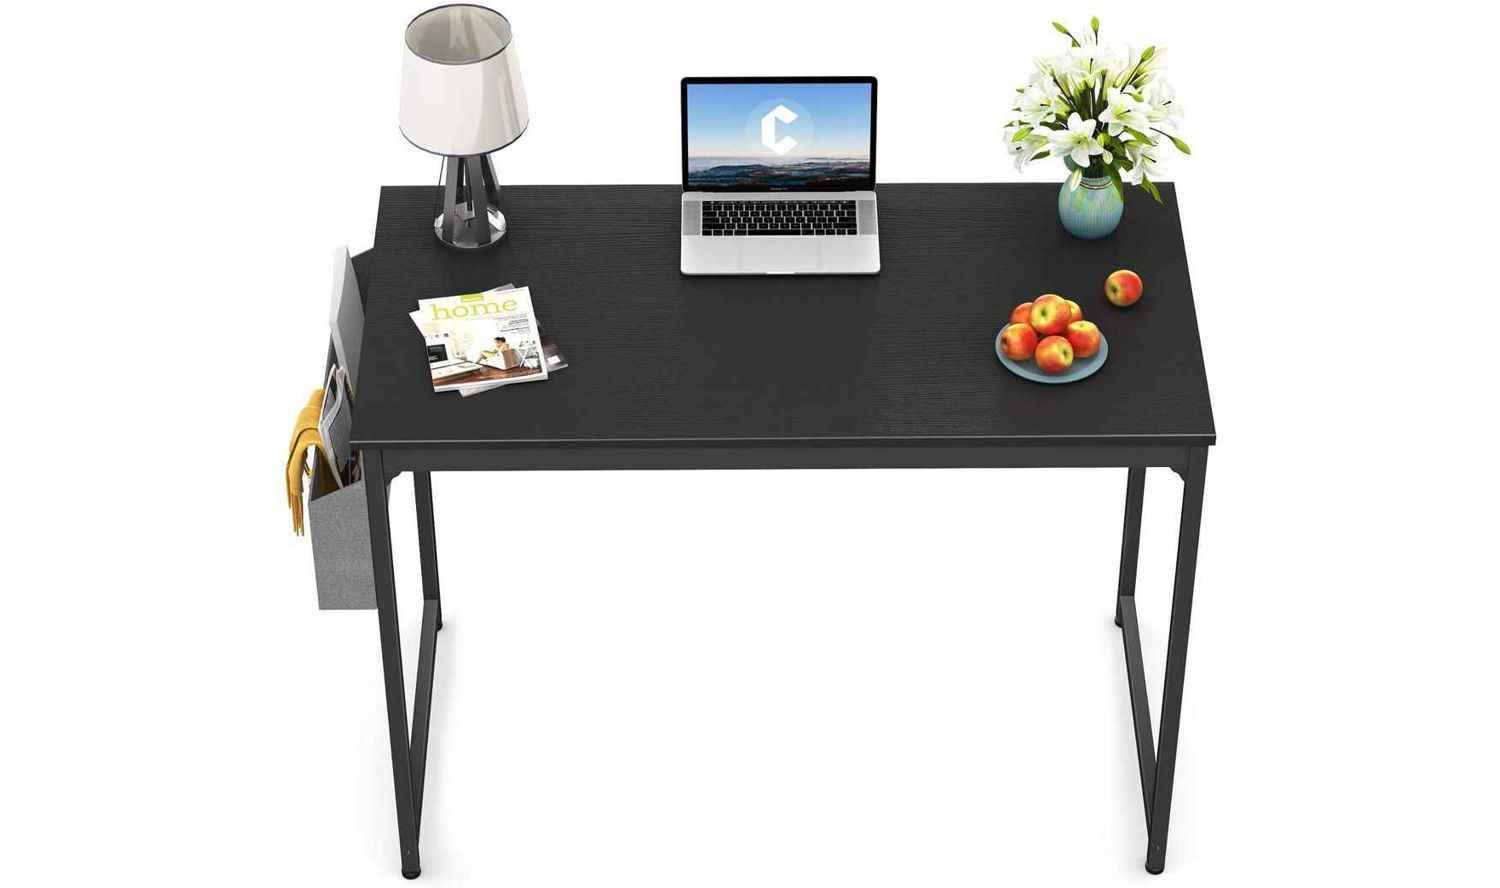 The NetDigz Editors rate the CubiCubi Writing Table as the Optional Best Budget Office Desk.